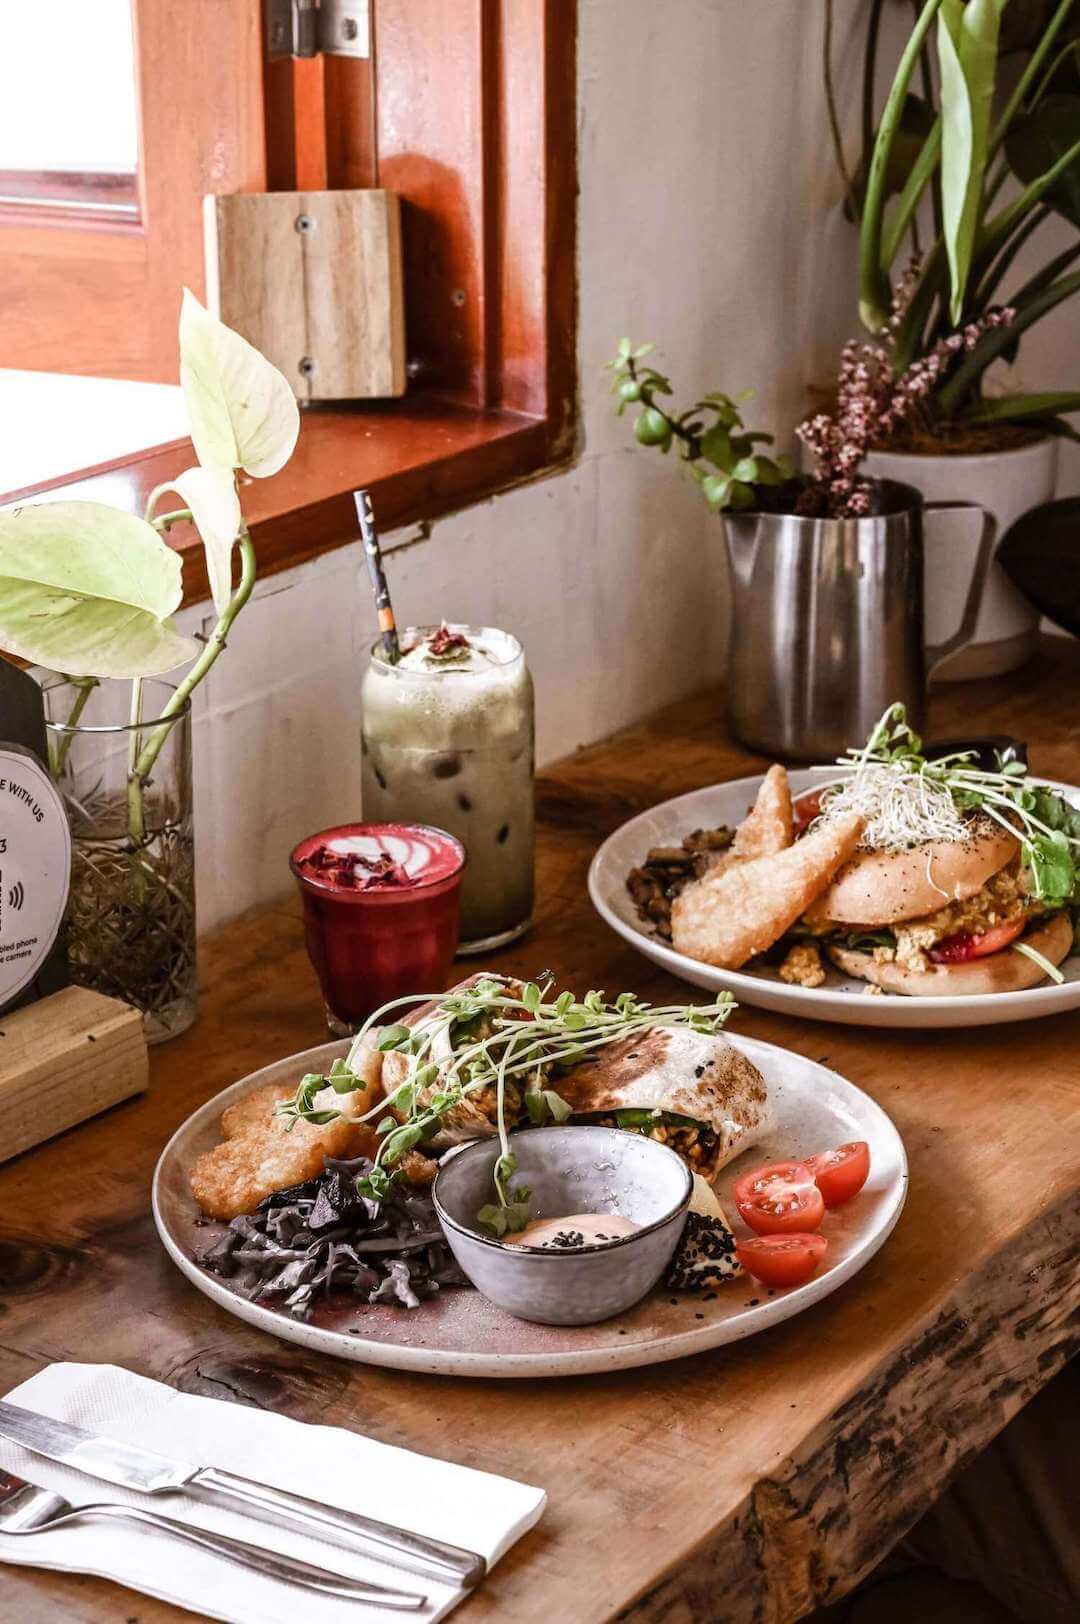 Discover the best cafe in Brighton for amazing breakfast, Melbourne best brunch and lunch near Melbourne VIC. You can also find a great kids cafe and Brighton cafe for dogs.